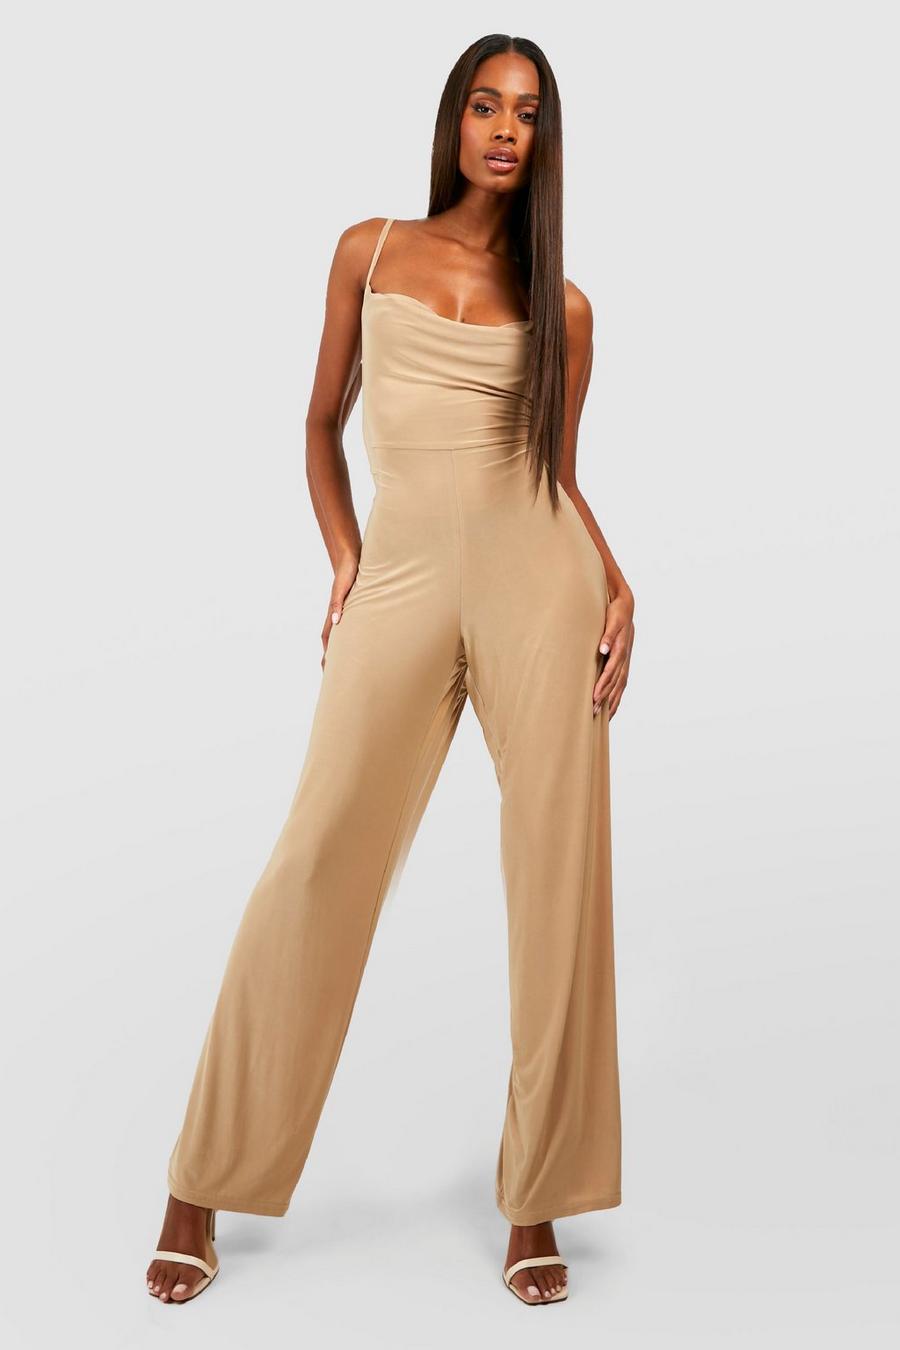 Premium Heavy Weight Slinky Cowl Neck Strappy Jumpsuit